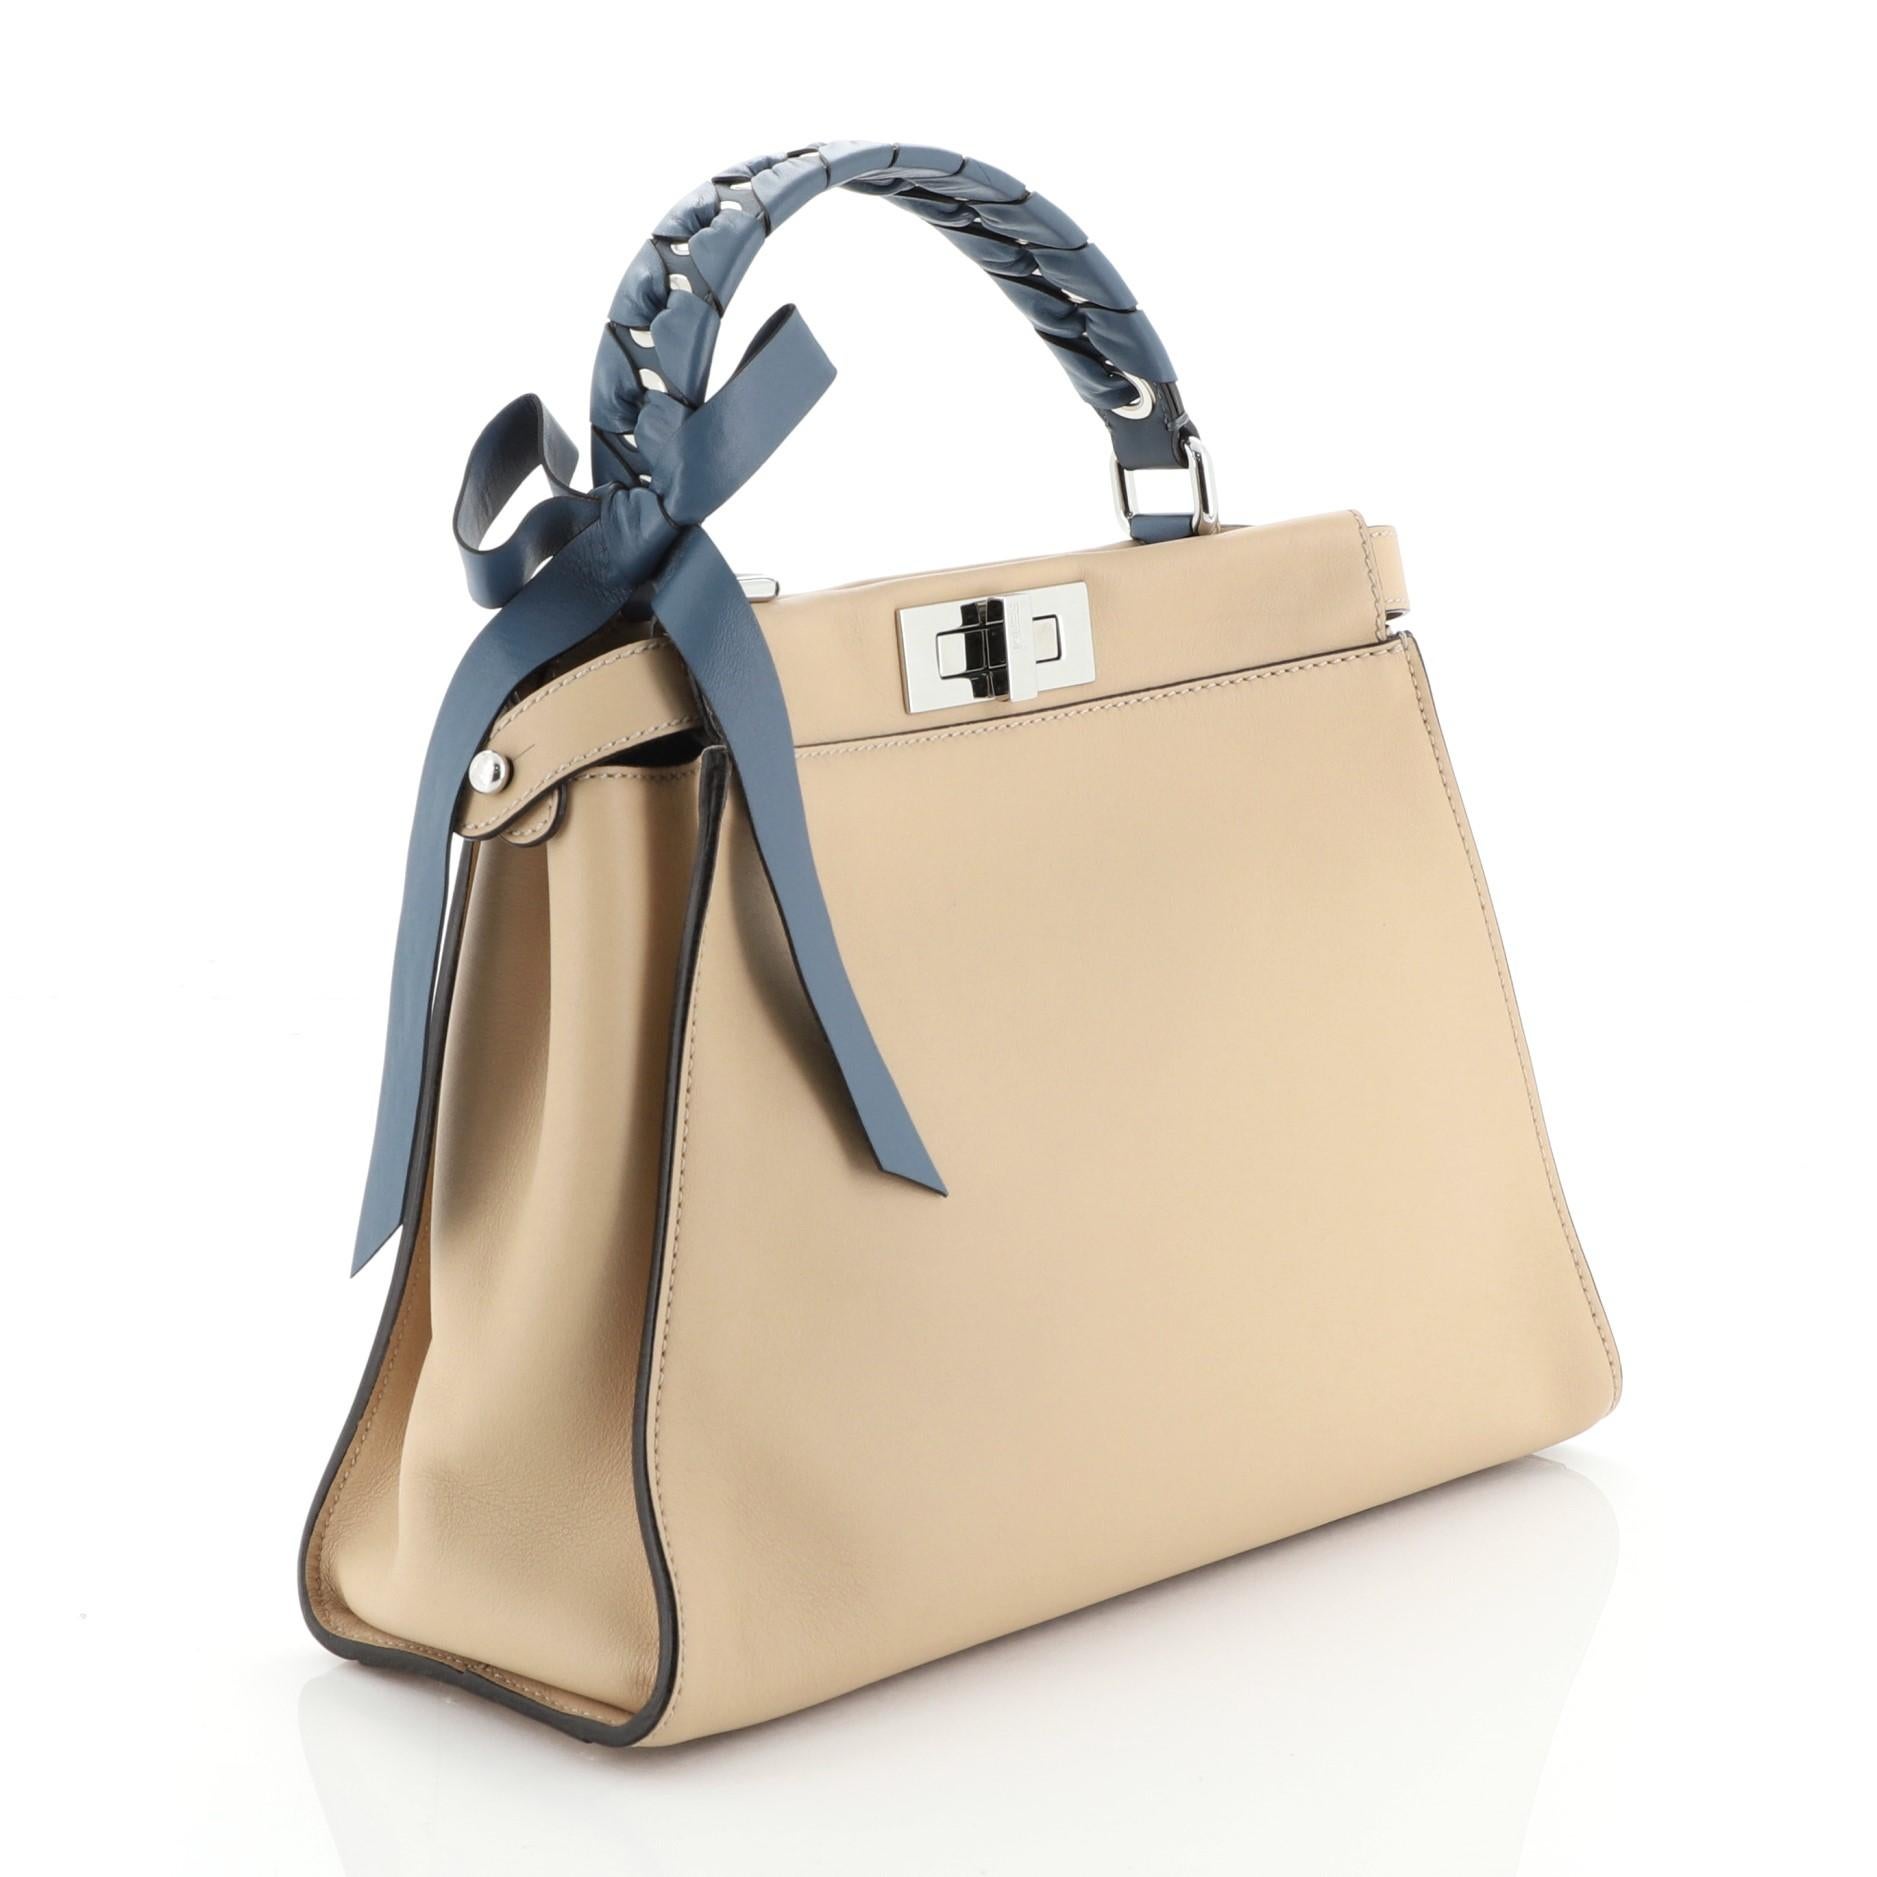 This Fendi Bow Peekaboo Bag Whipstitch Leather Regular crafted from neutral leather with whipstitch detailing, features a top frame silhouette, flat leather handle, and silver-tone hardware. Its turn-lock closure opens to a neutral leather and blue